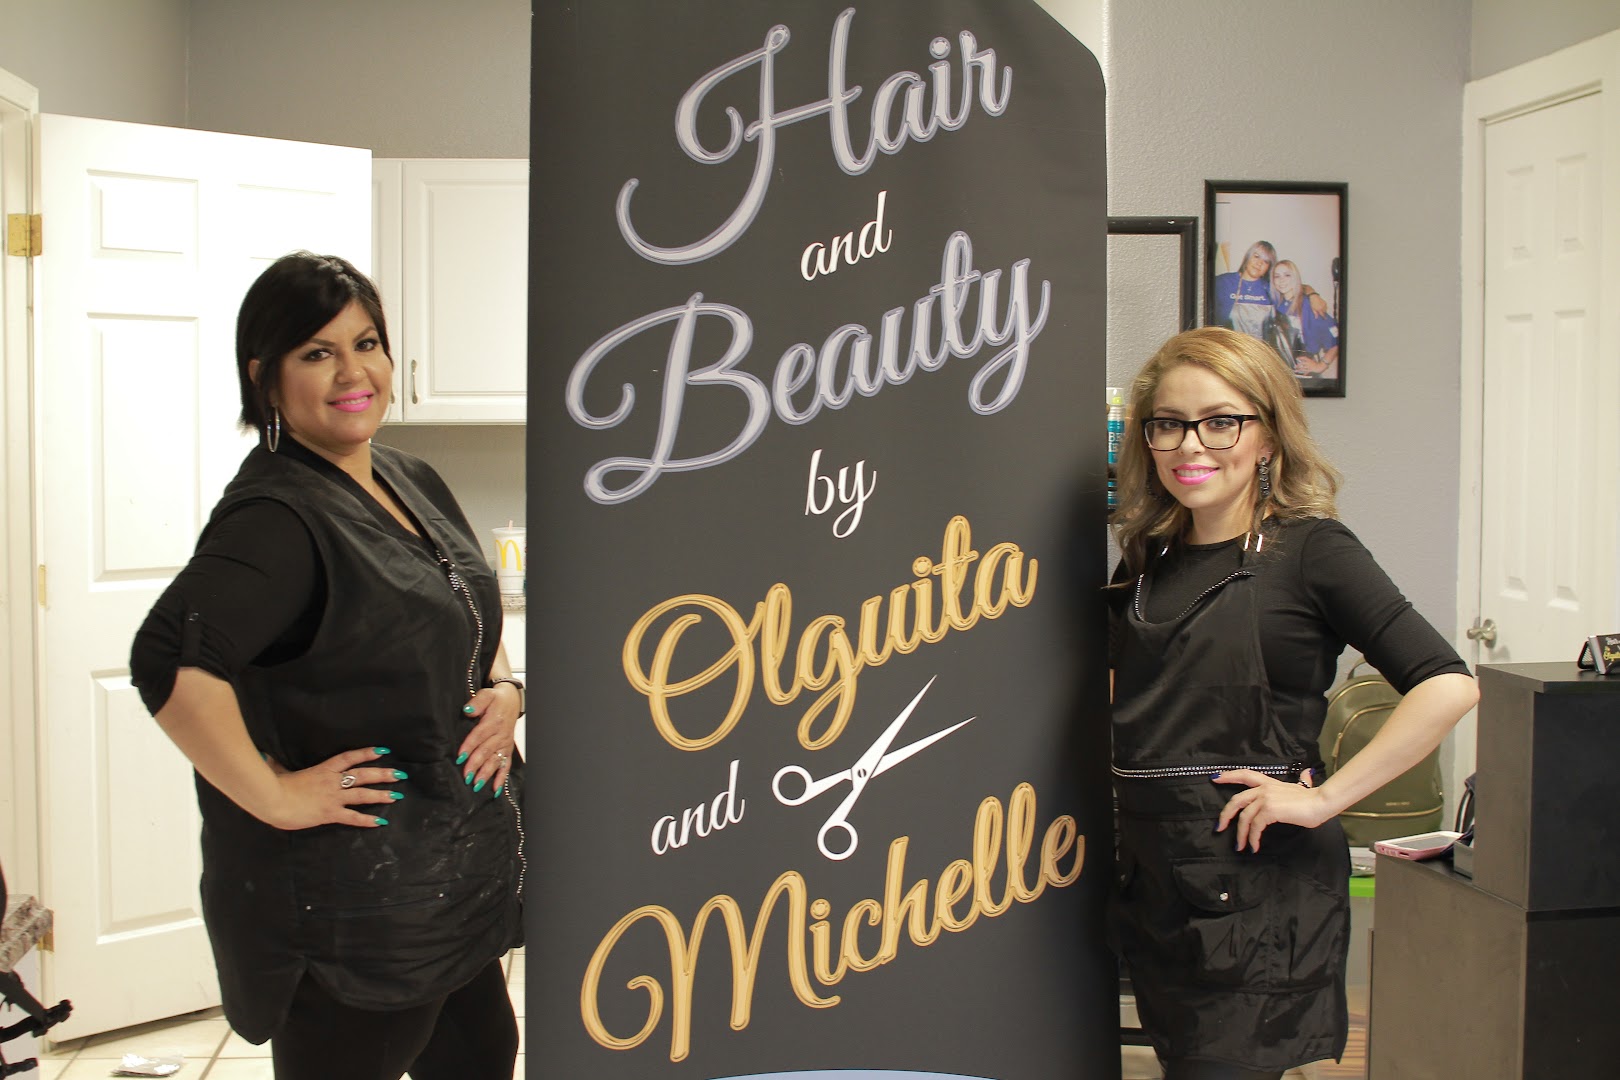 Hair and Beauty by Olguita and Michelle